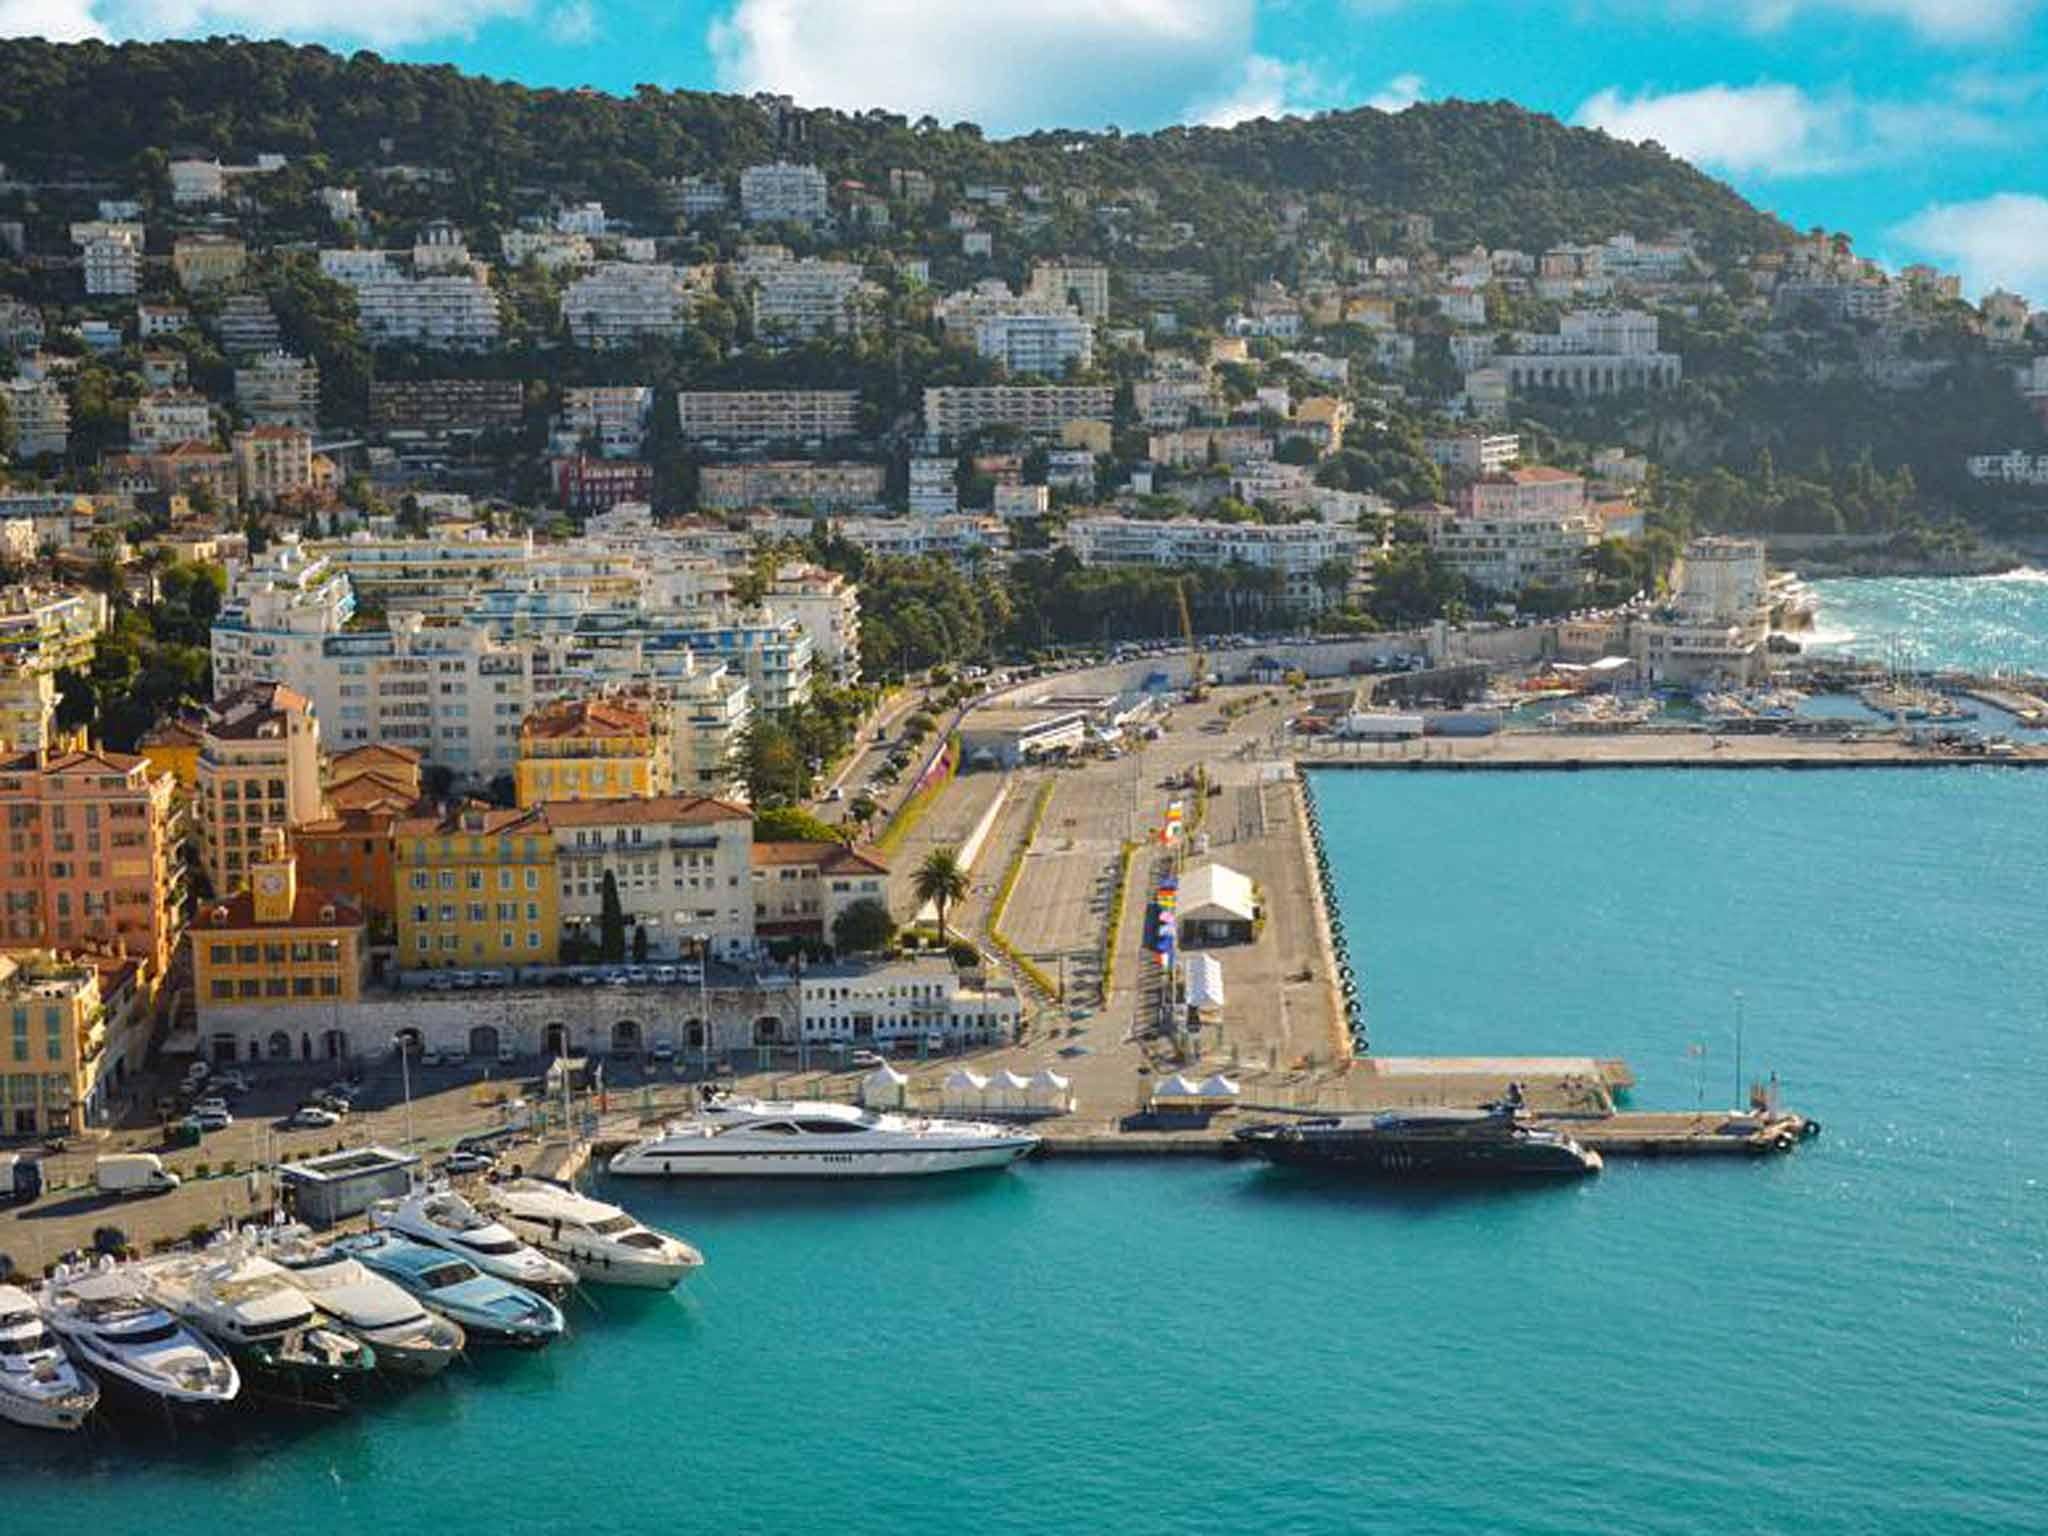 Blue wonder: the bay and yacht harbour in Nice, Côte d’Azur